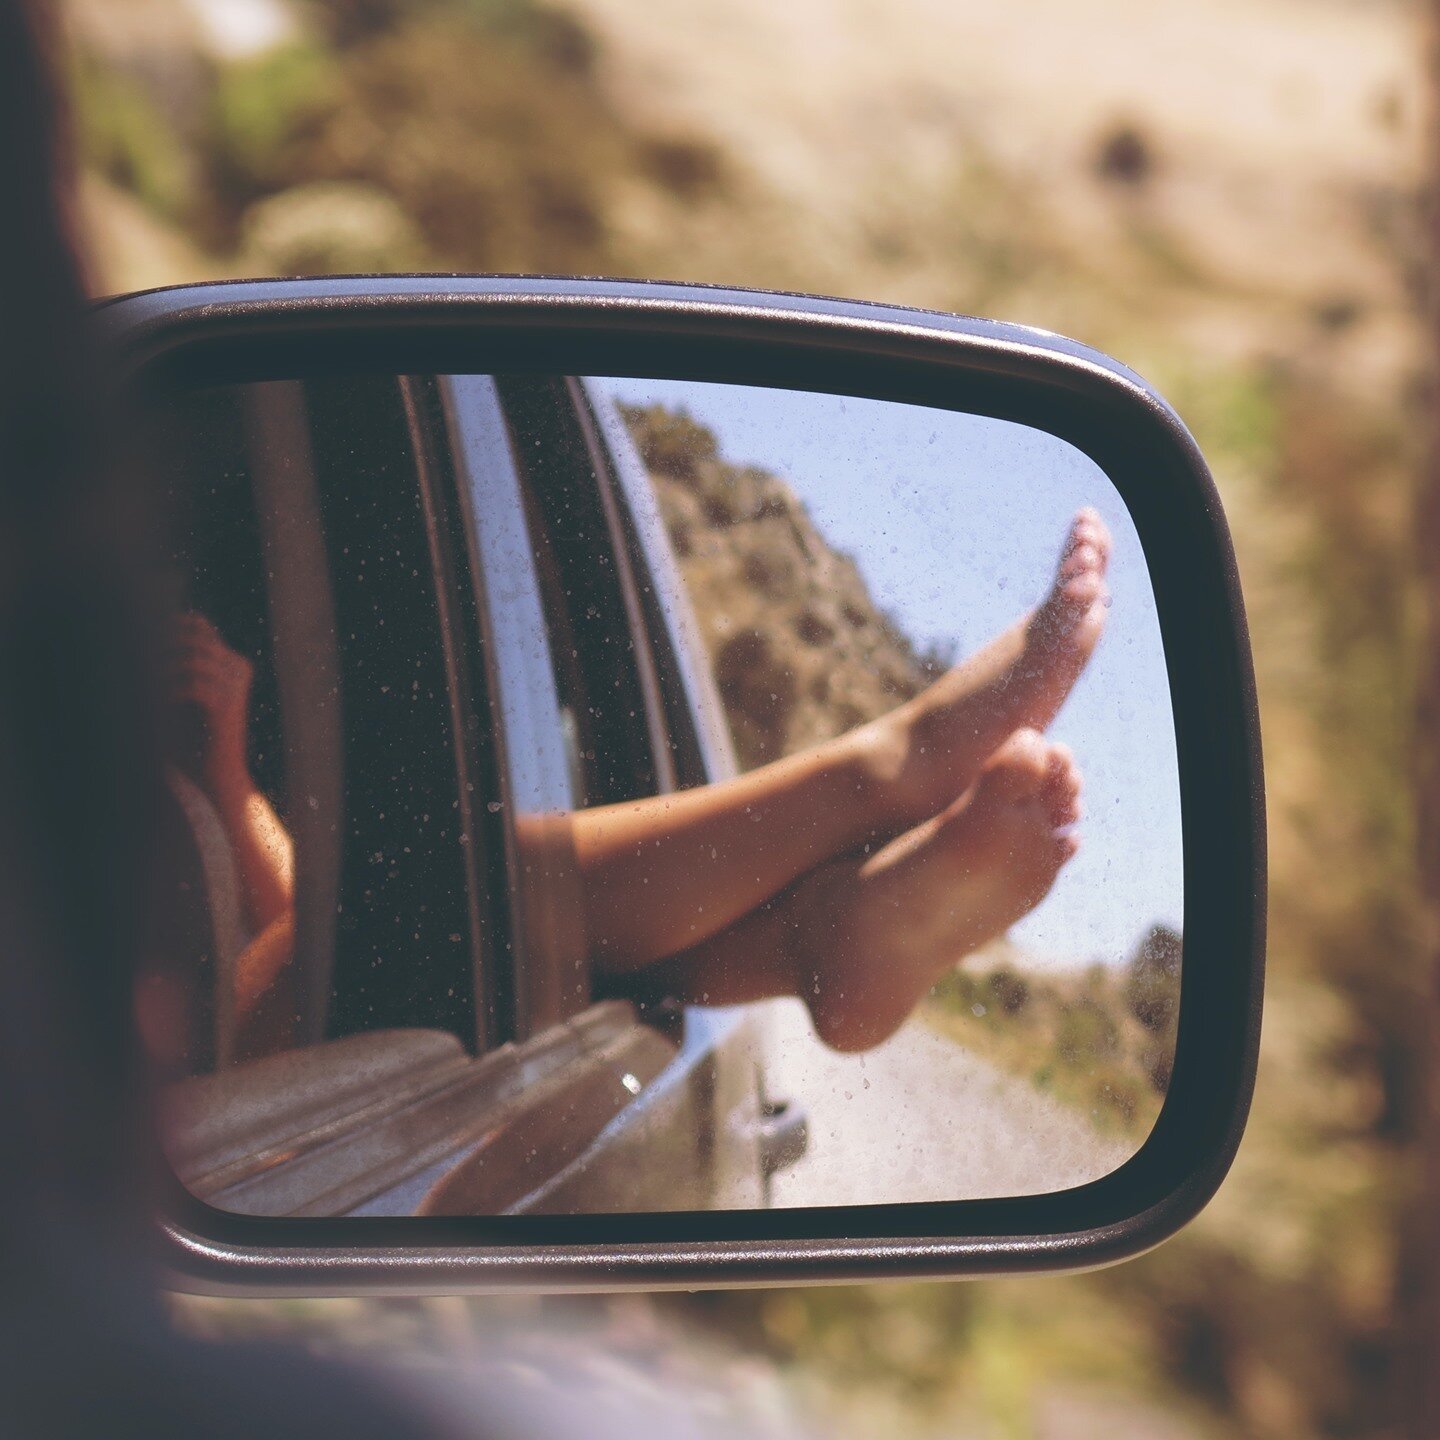 Itching for a road trip to ditch those winter blues? We made a playlist for your sunny escape. The Go Go Girls playlist on Spotify includes music from Dave &amp; Kara, Bruce Springsteen, Arcade Fire, Regina Spektor, and others. Enjoy on Spotify throu